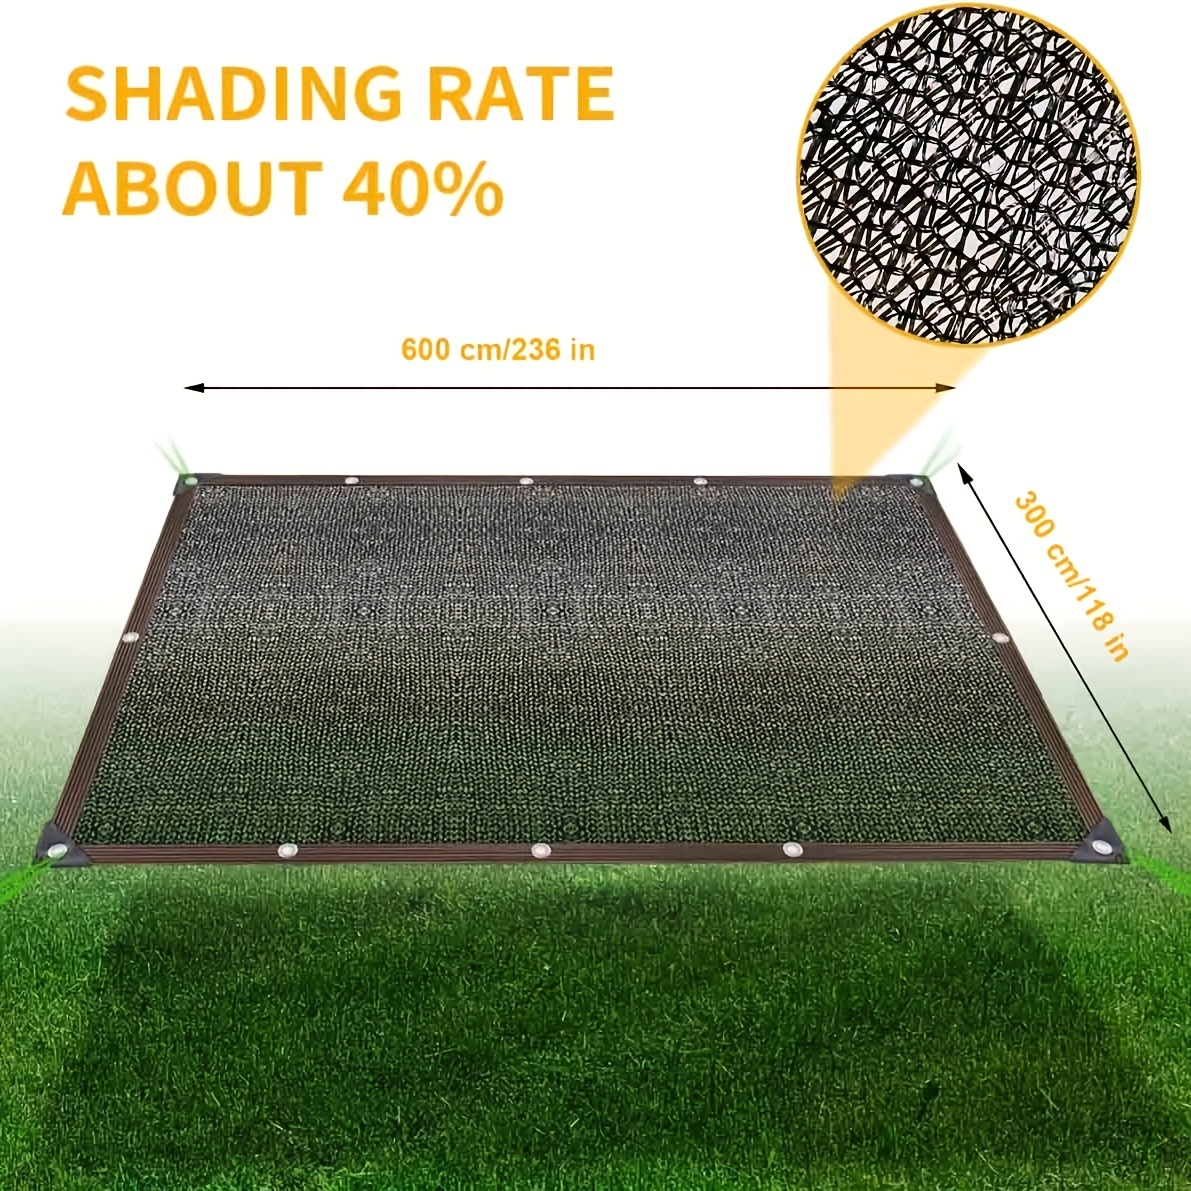 1pc shade cloth garden shade mesh net with grommets sun shade cover for pergola patio plants greenhouse chicken coop outdoor with grommets uv resistant sun net for pergola plants gardens patio canopy